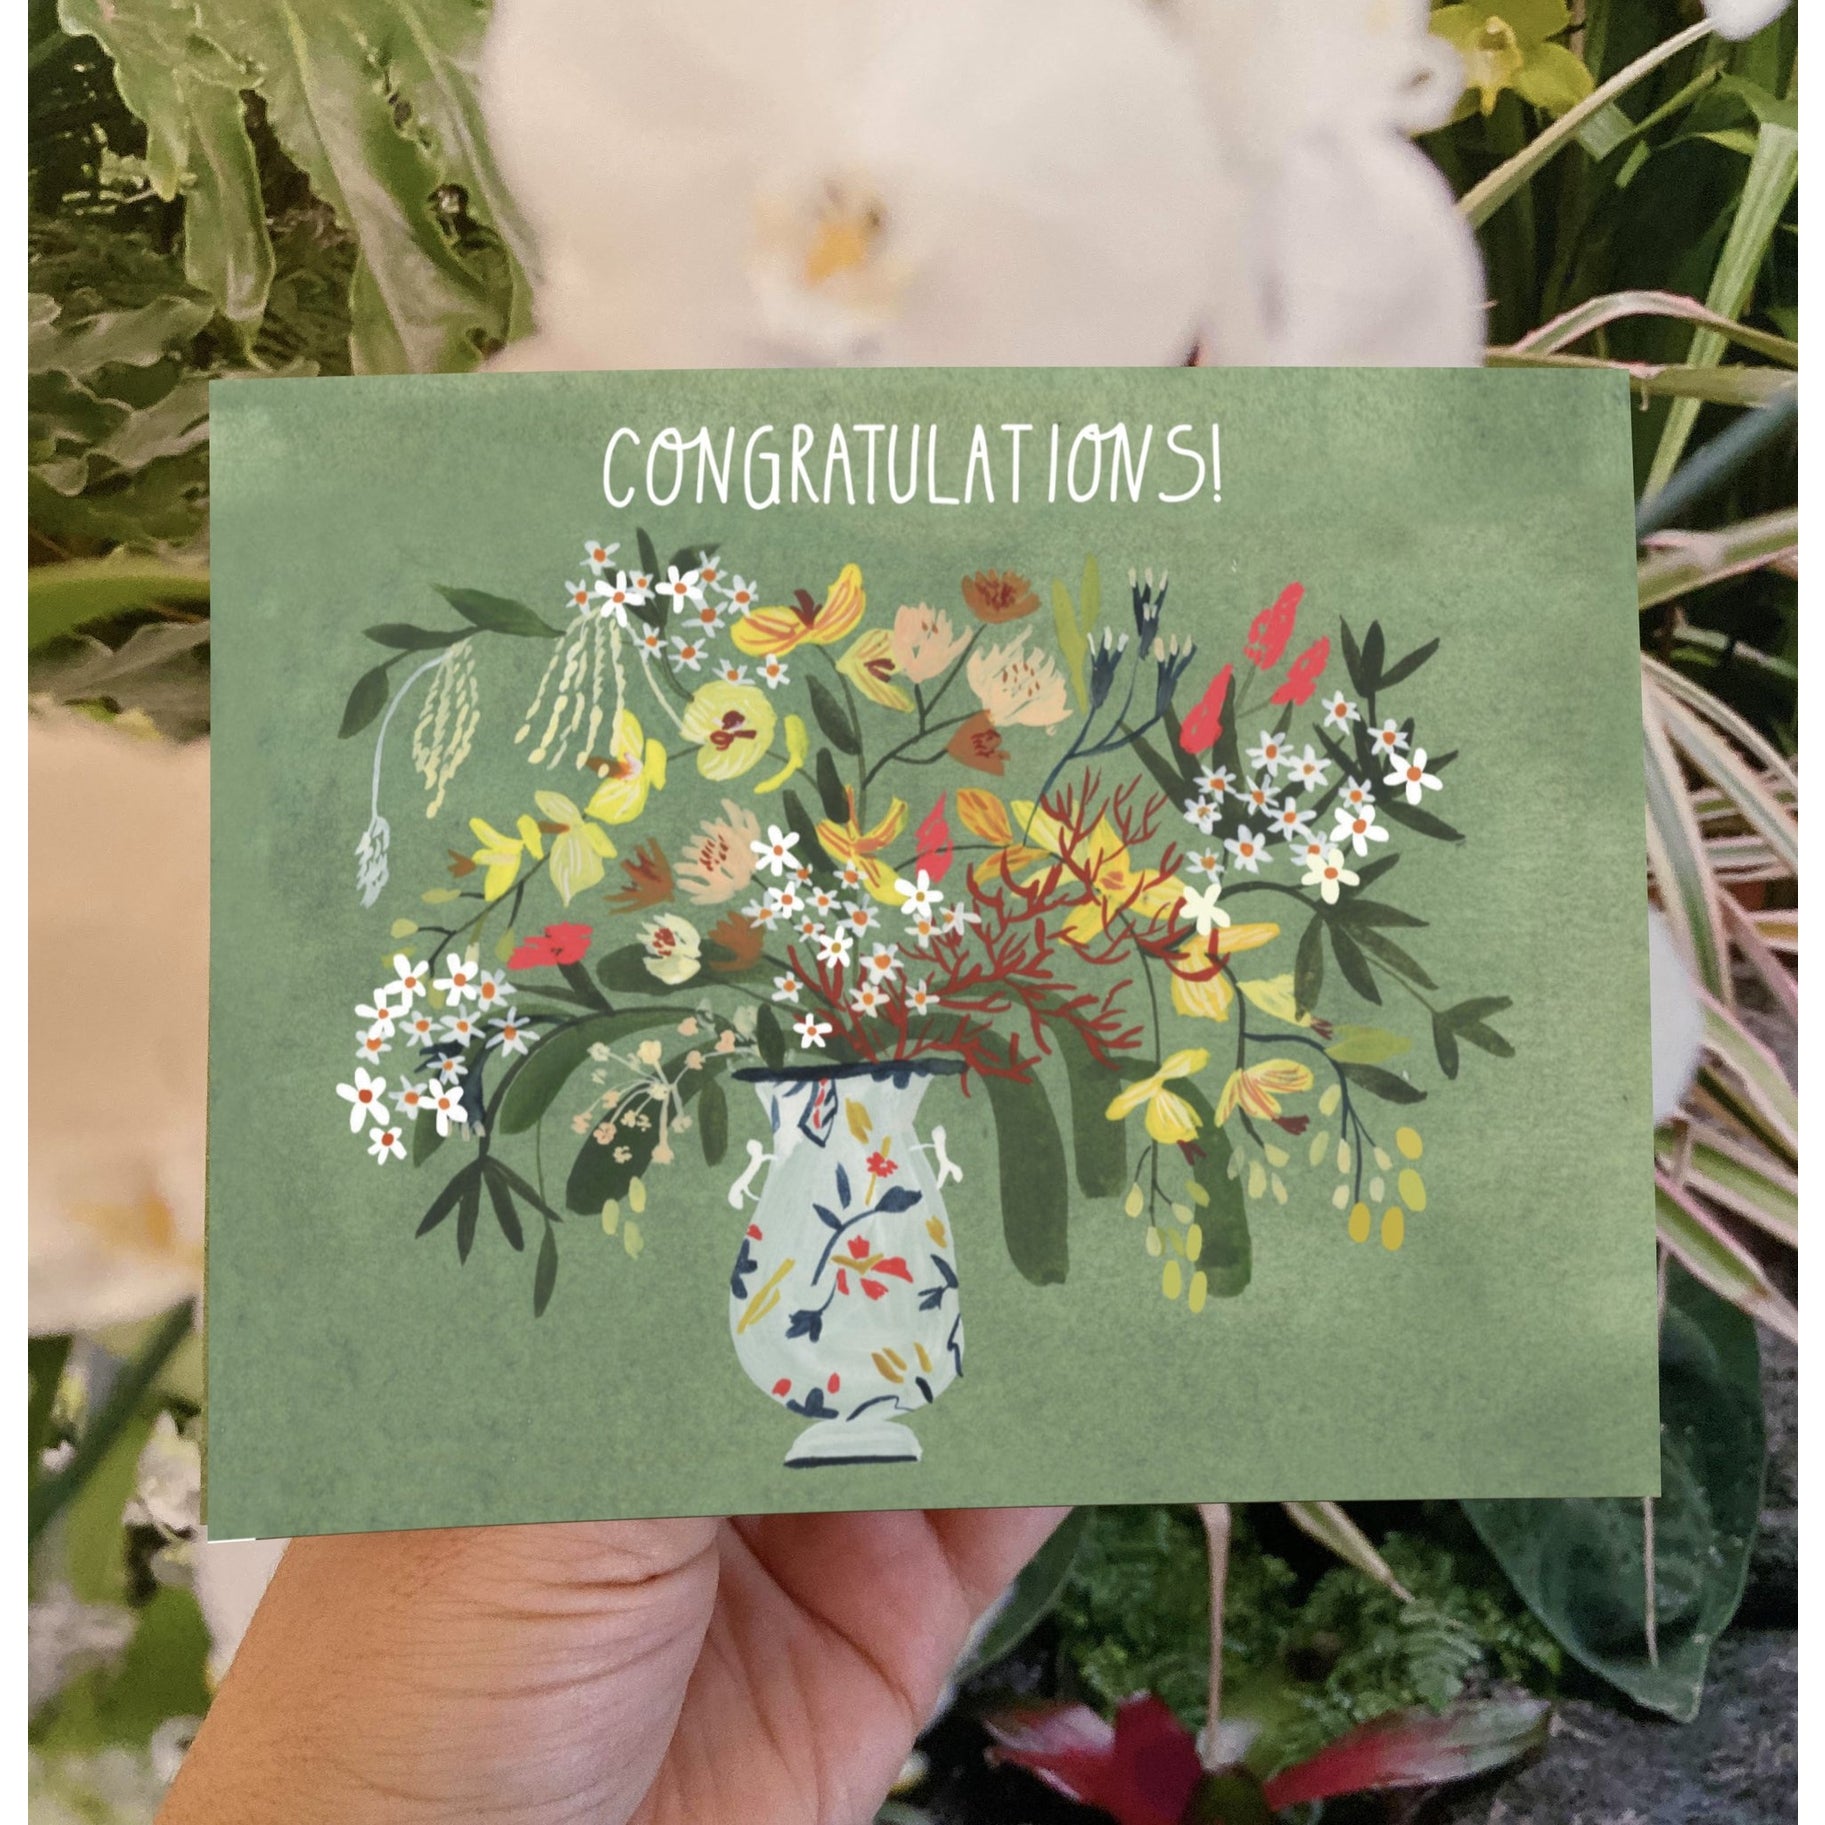 Folding card with illustration of flower bouquet in painted vase Congratulations! written above